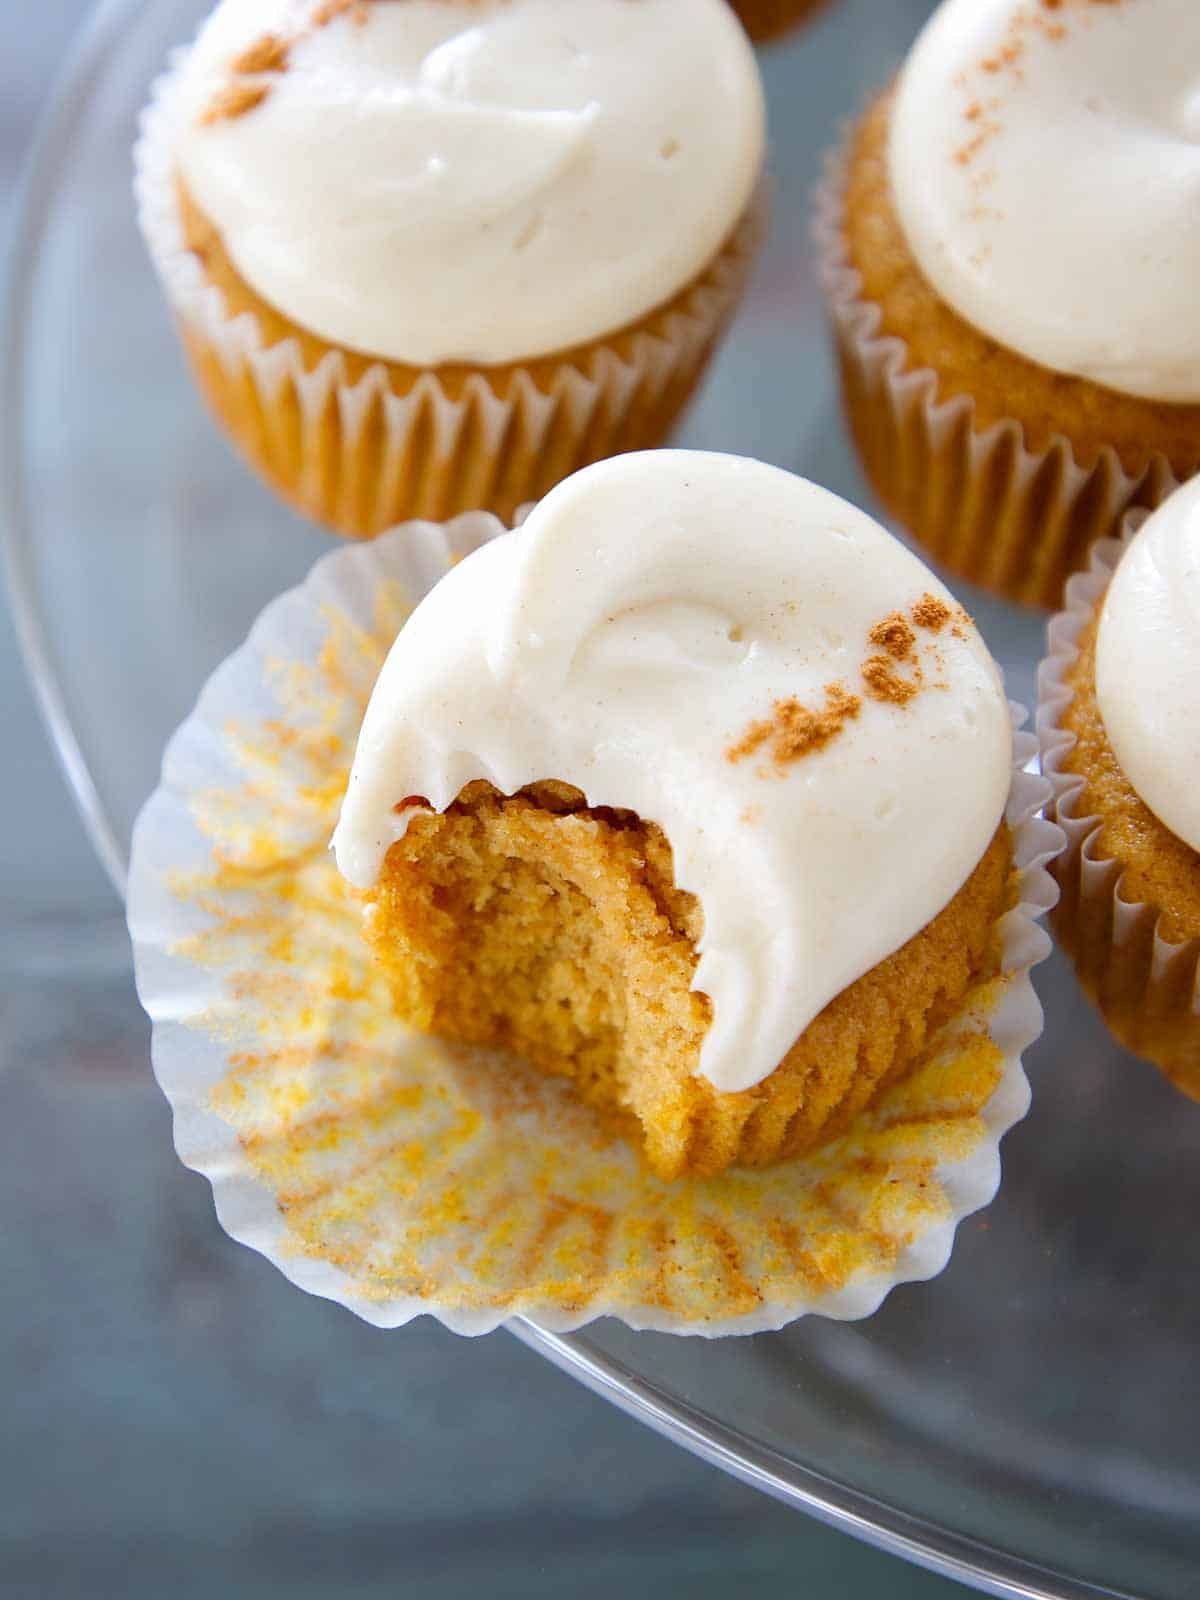 spiced cream cheese buttercream on pumpkin cupcakes on cake stand.